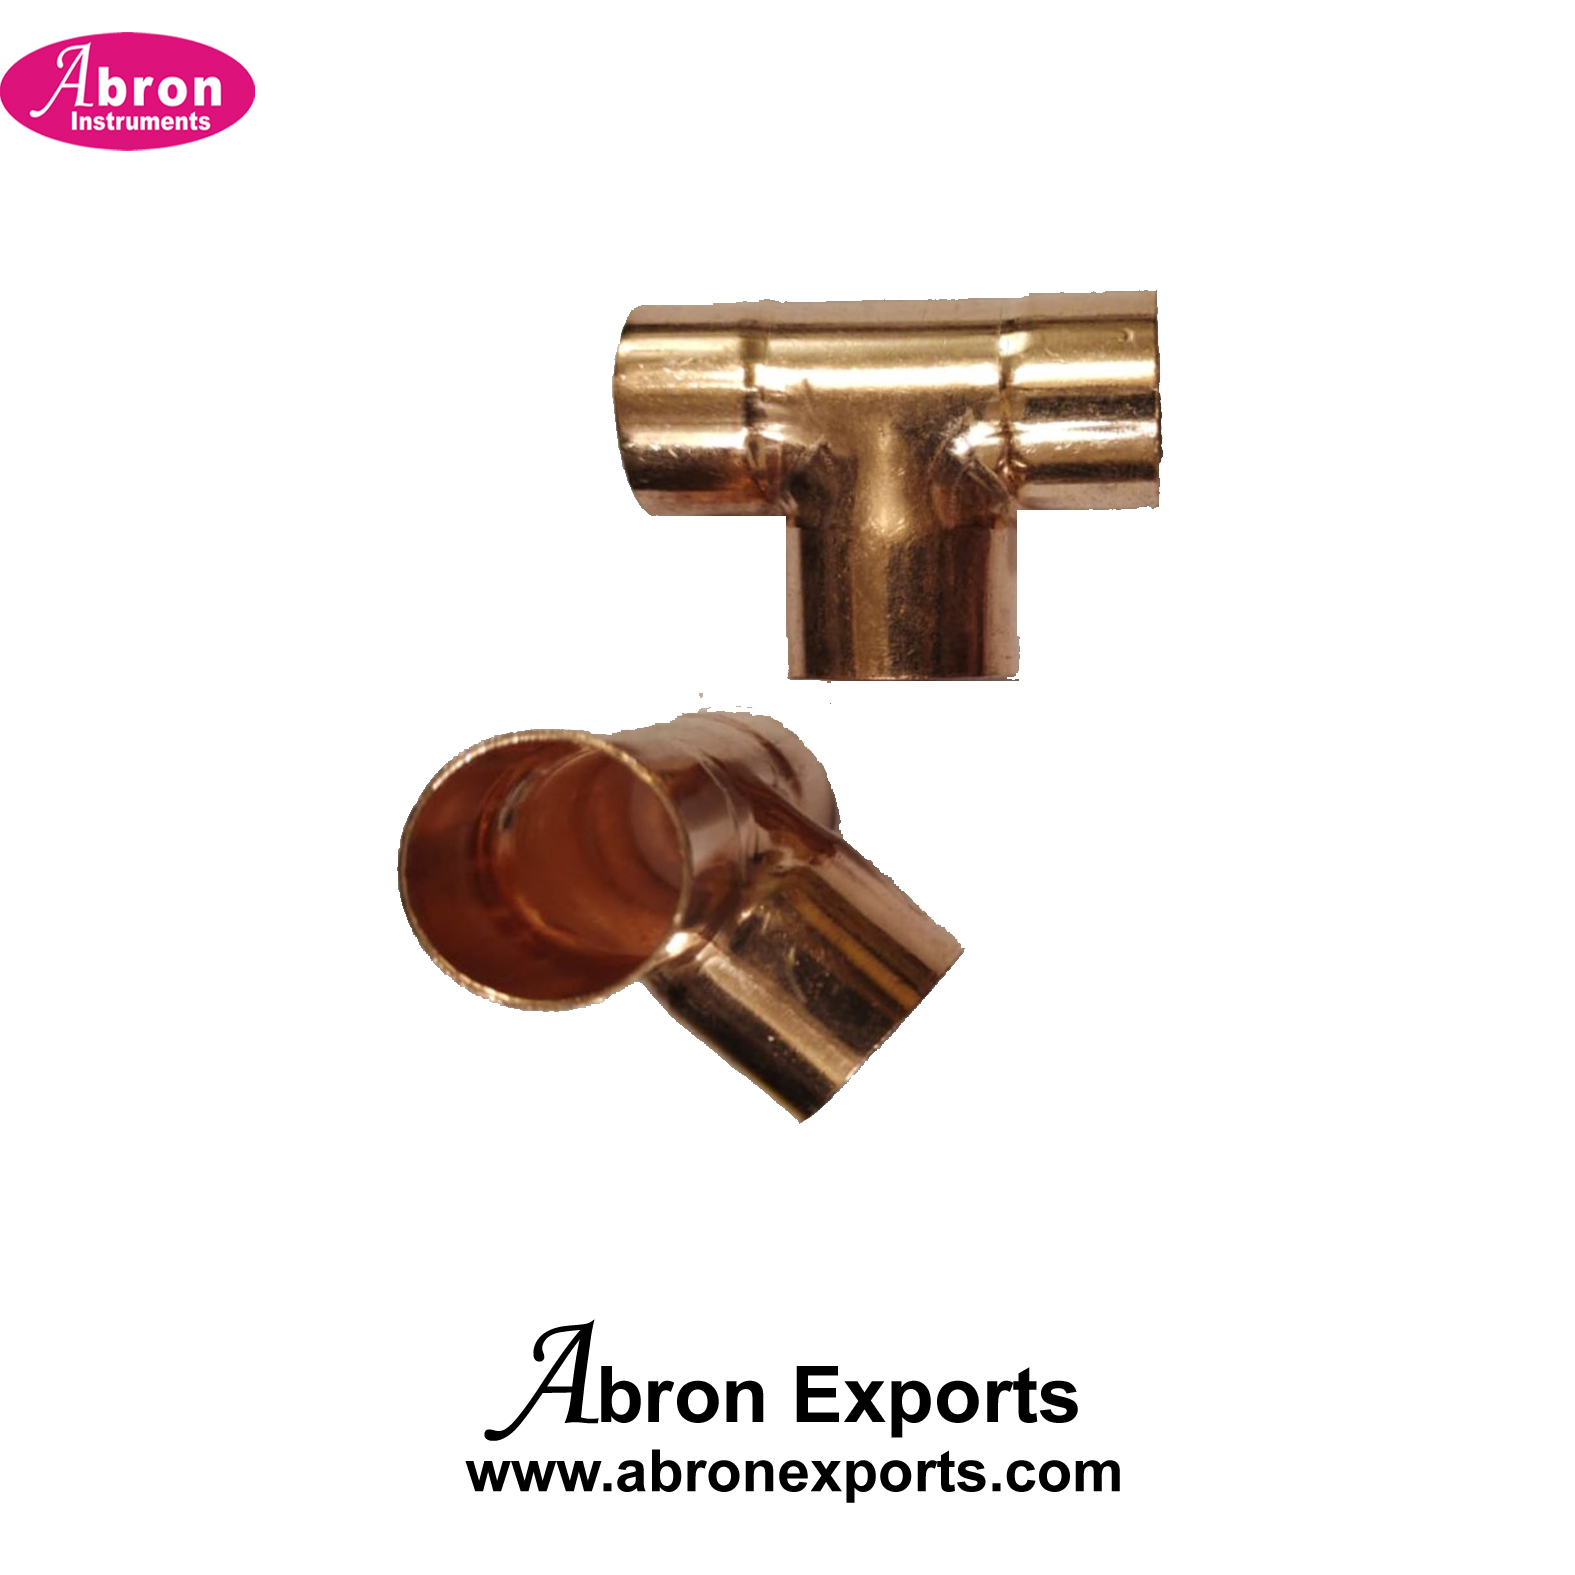 Medical gas Pipe Line spare copper Tee 15mm or 22mm Pack of 100 each gas for pipeline installation Abron ABM-1121PT15 